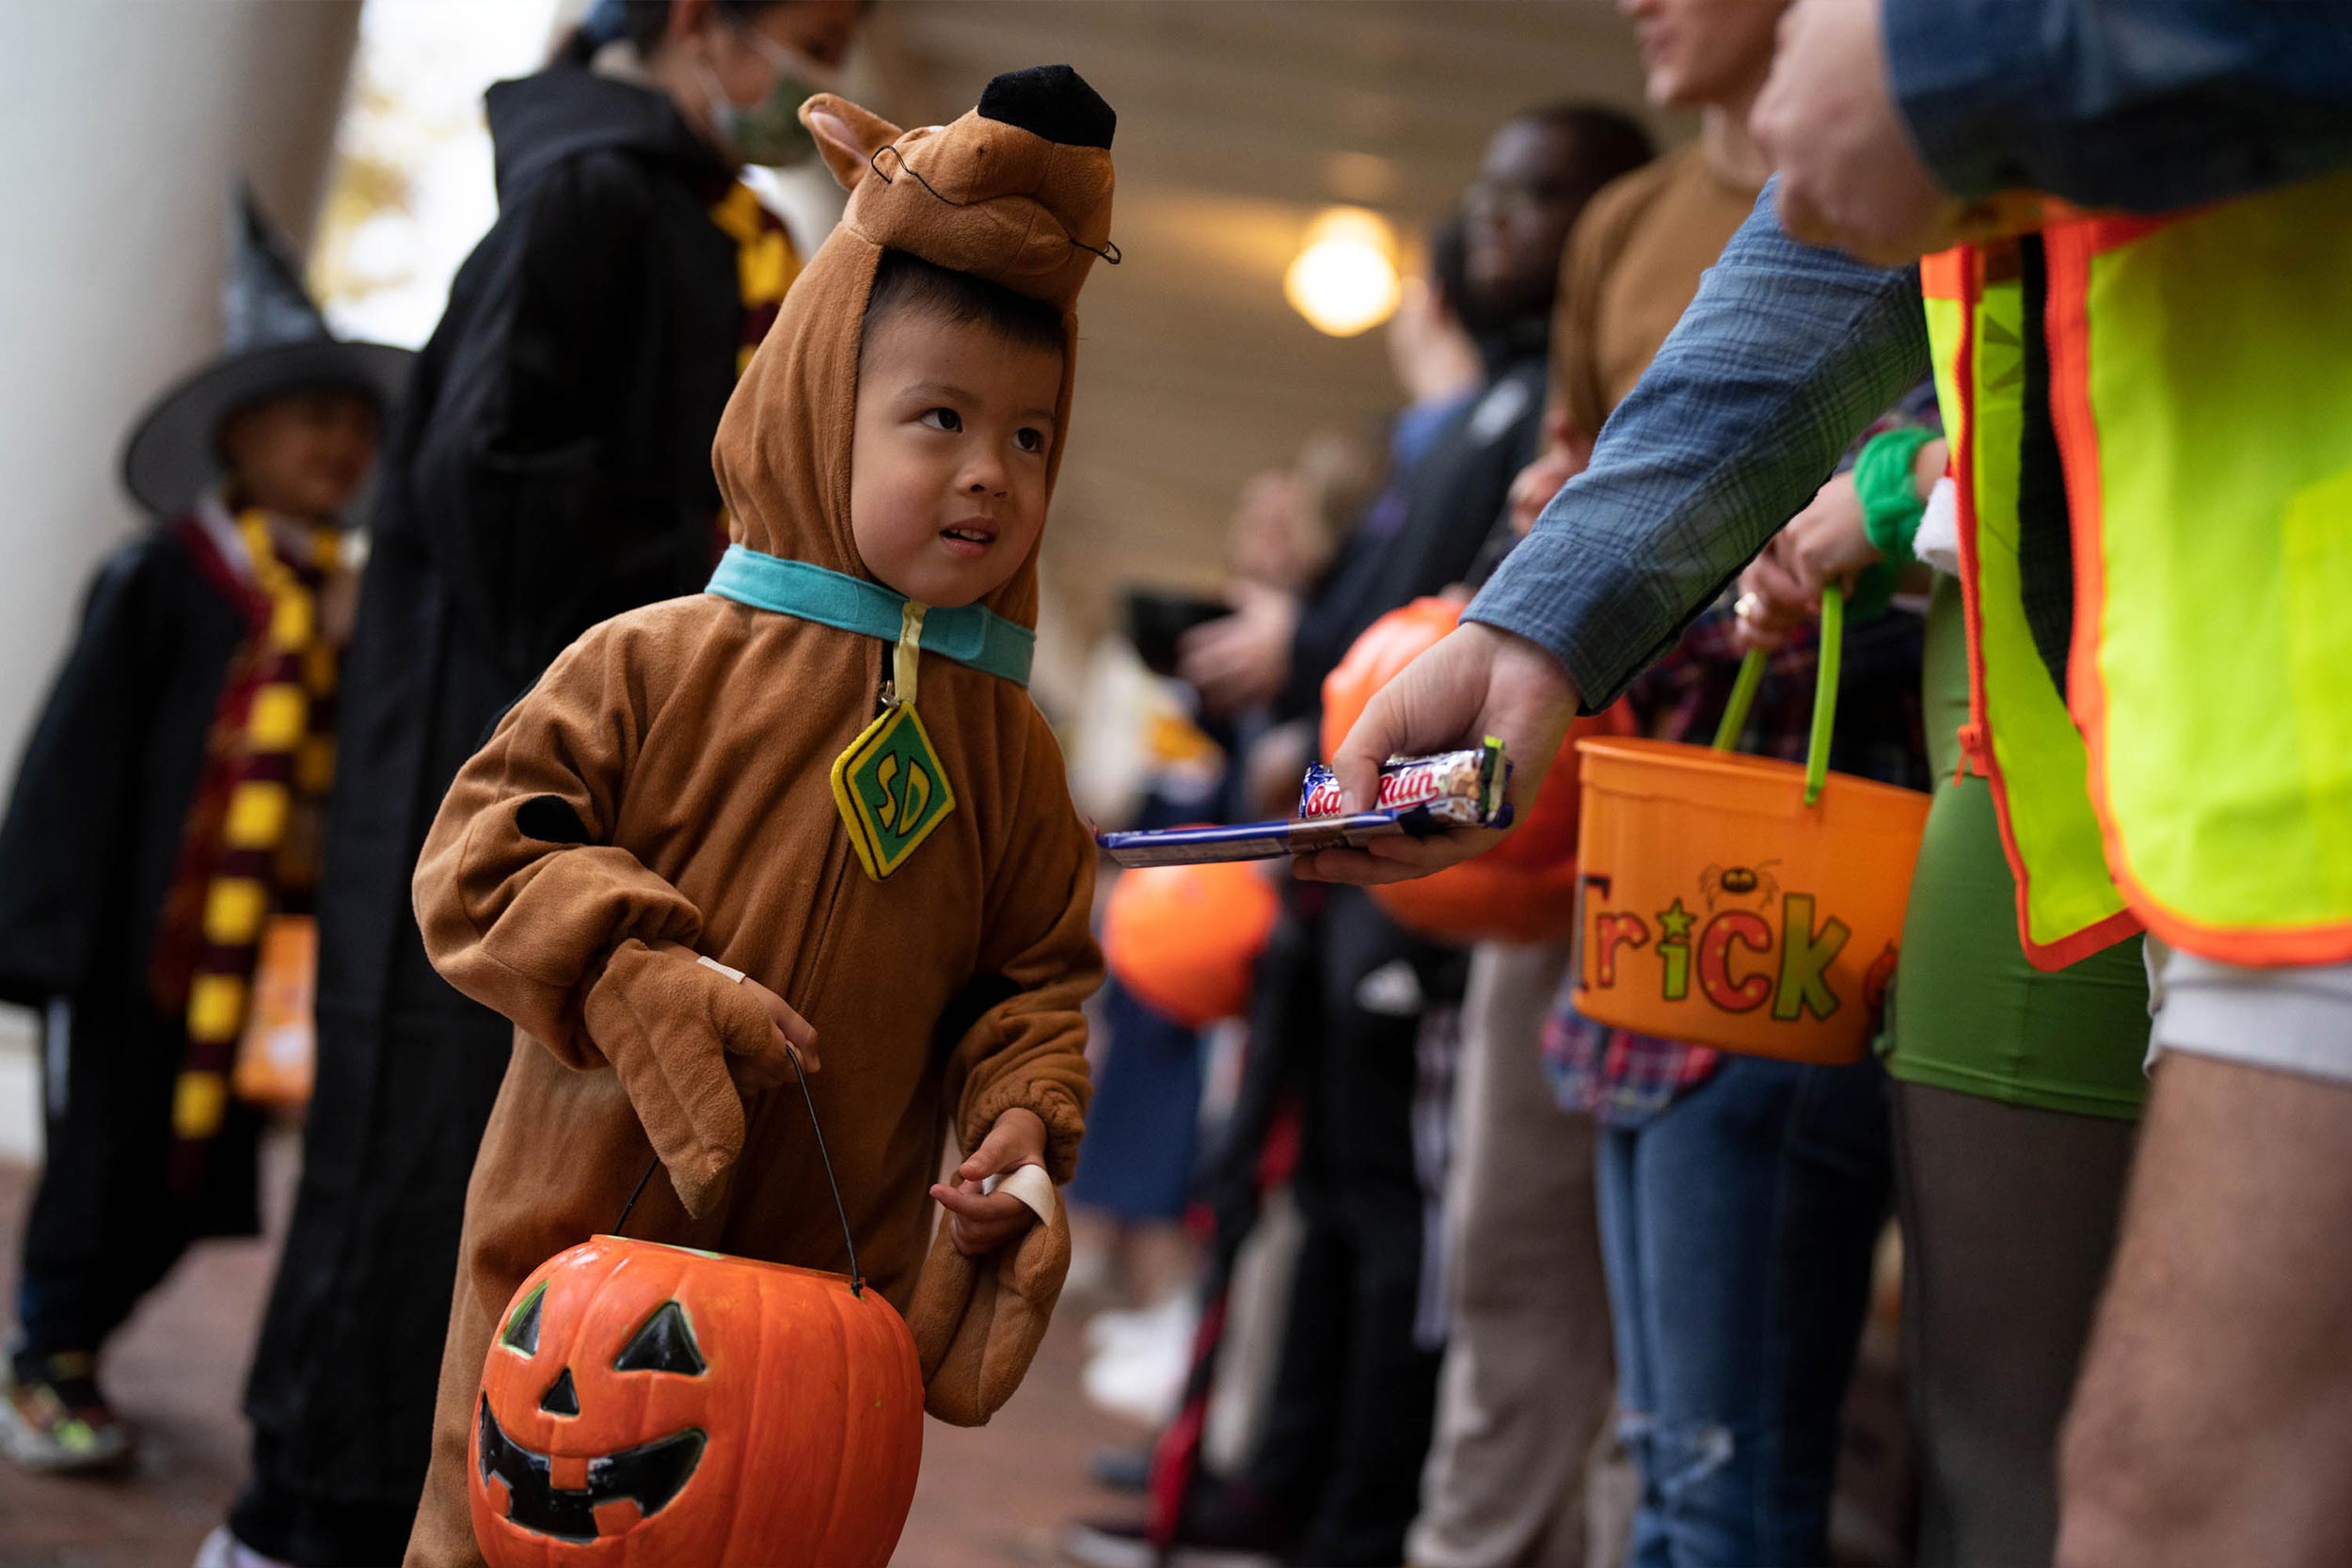 Little Scooby doo taking candy from a college student for their pumpkin bucket